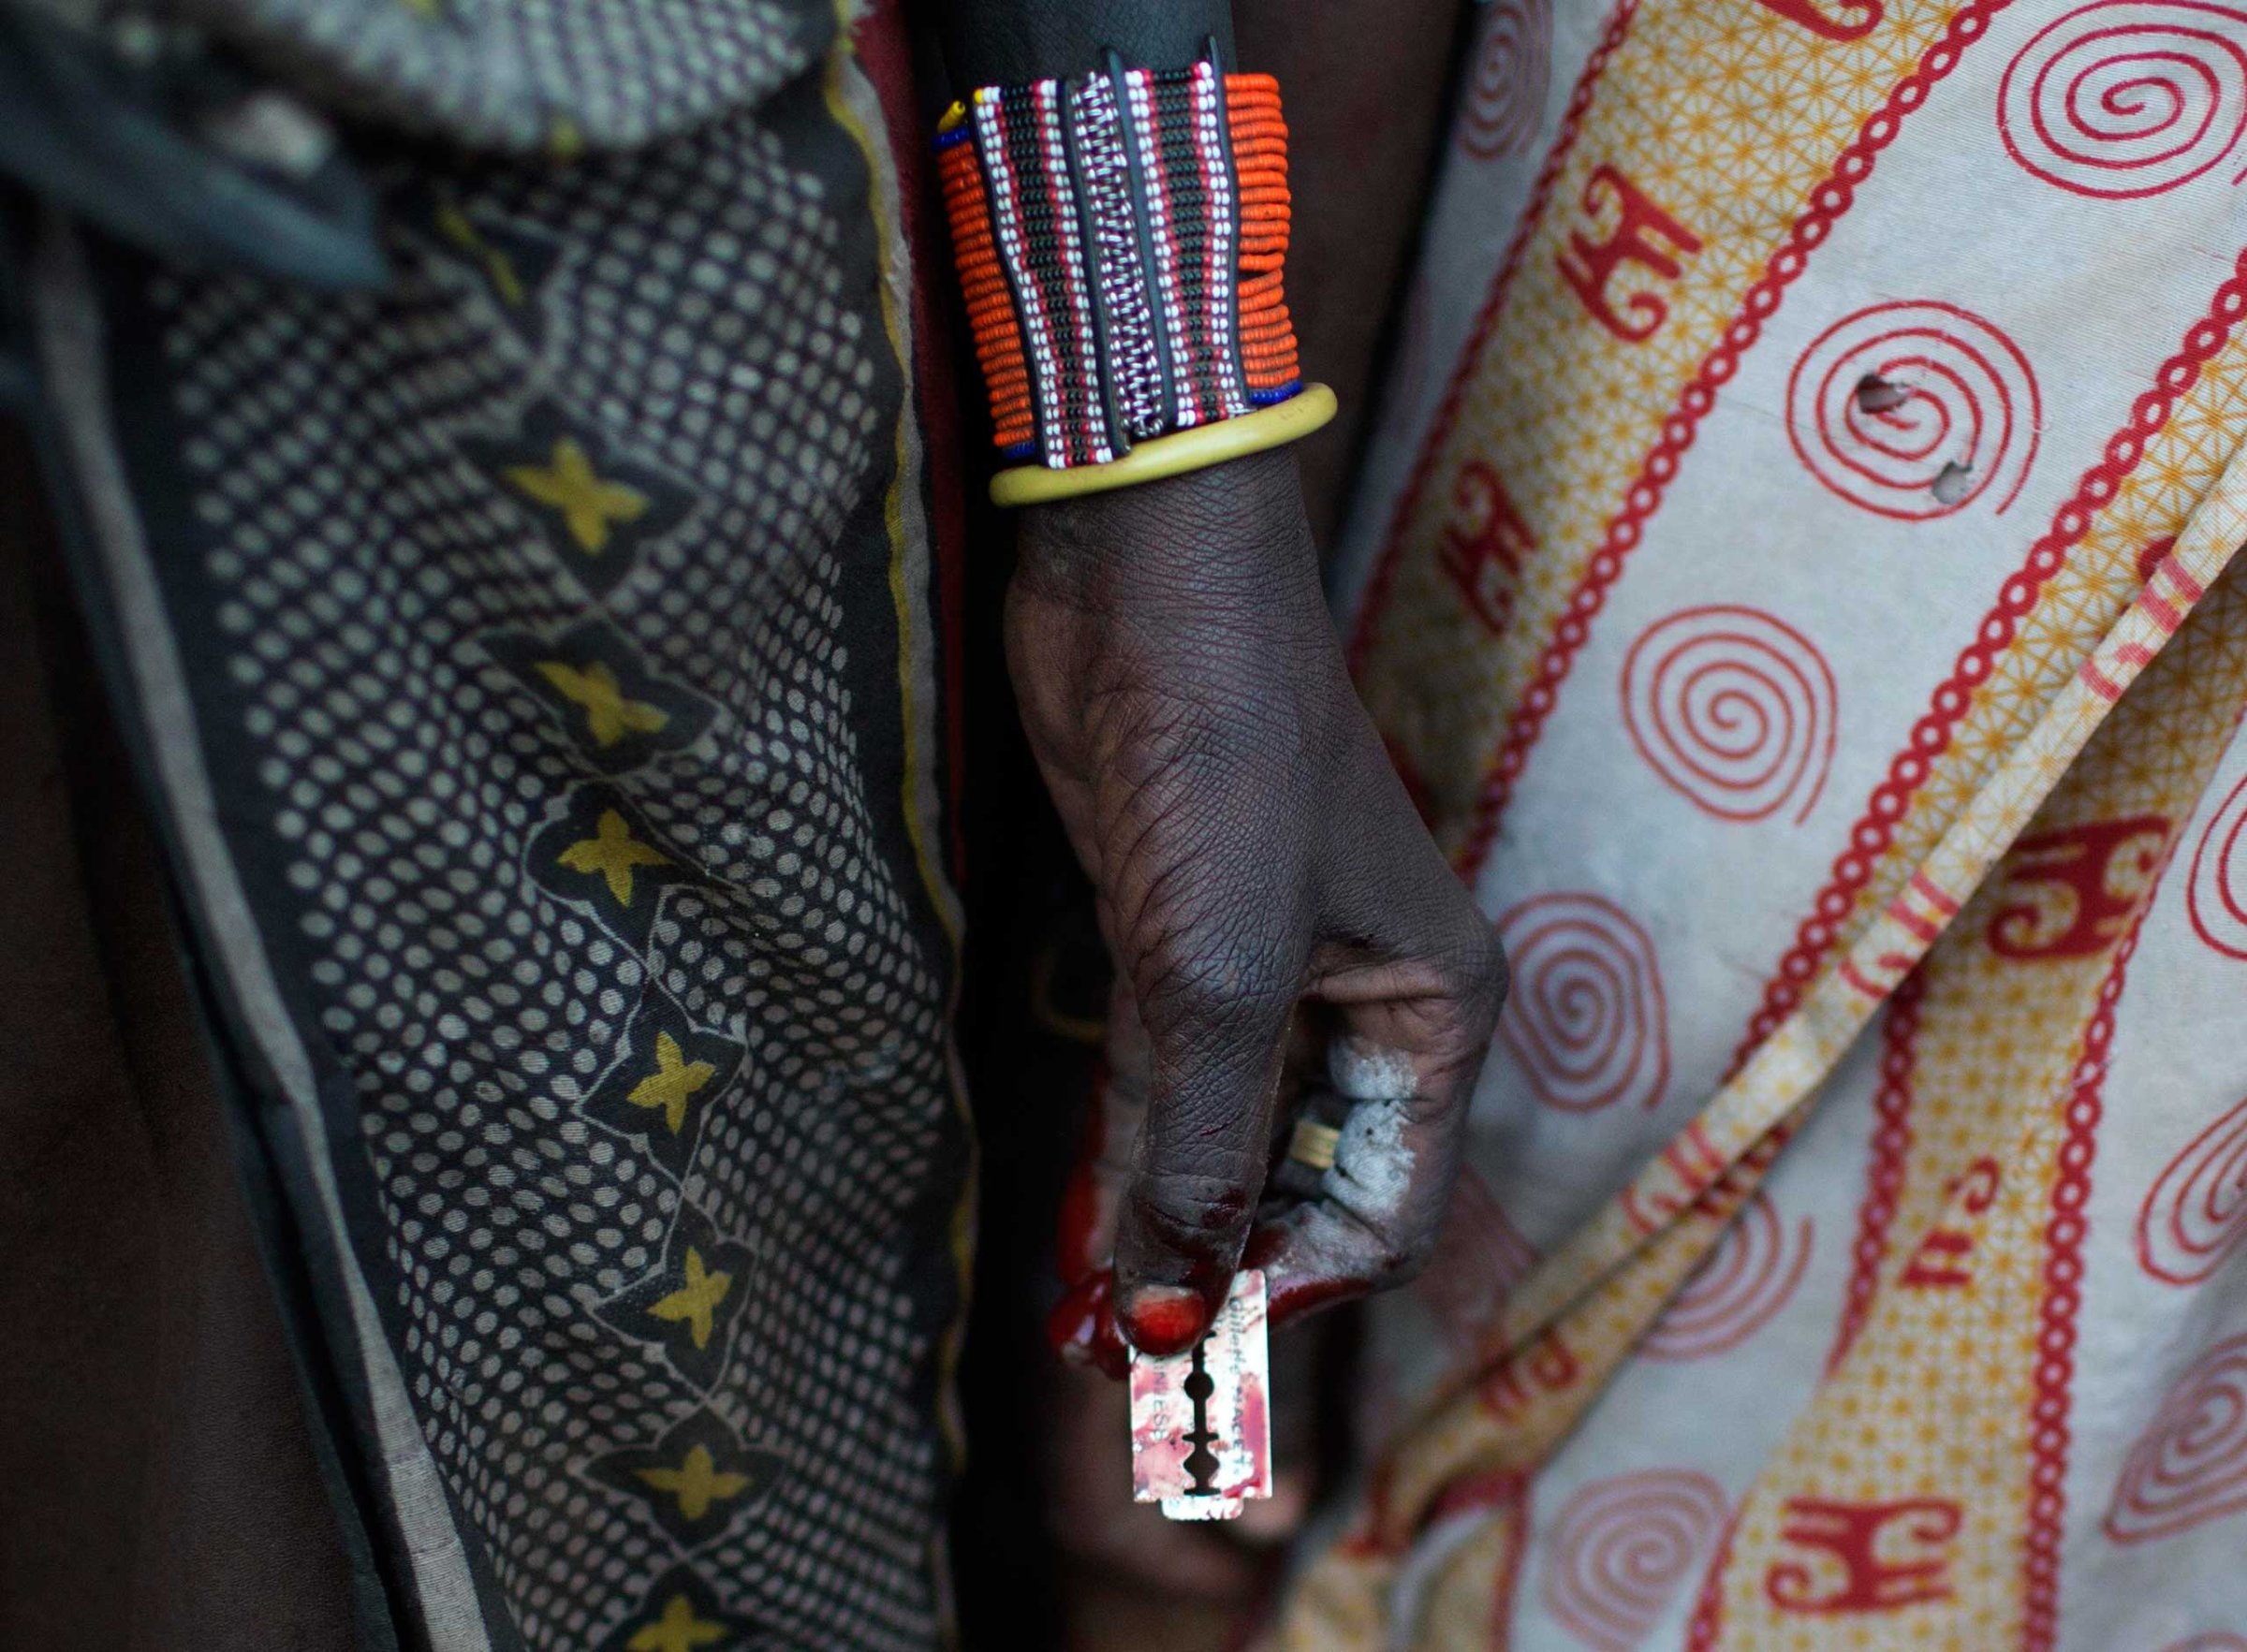 A Pokot woman holds a razor blade after performing a circumcision on four girls in a village about 80 kilometres from the town of Marigat in Baringo County, Kenya, Oct. 16, 2014.